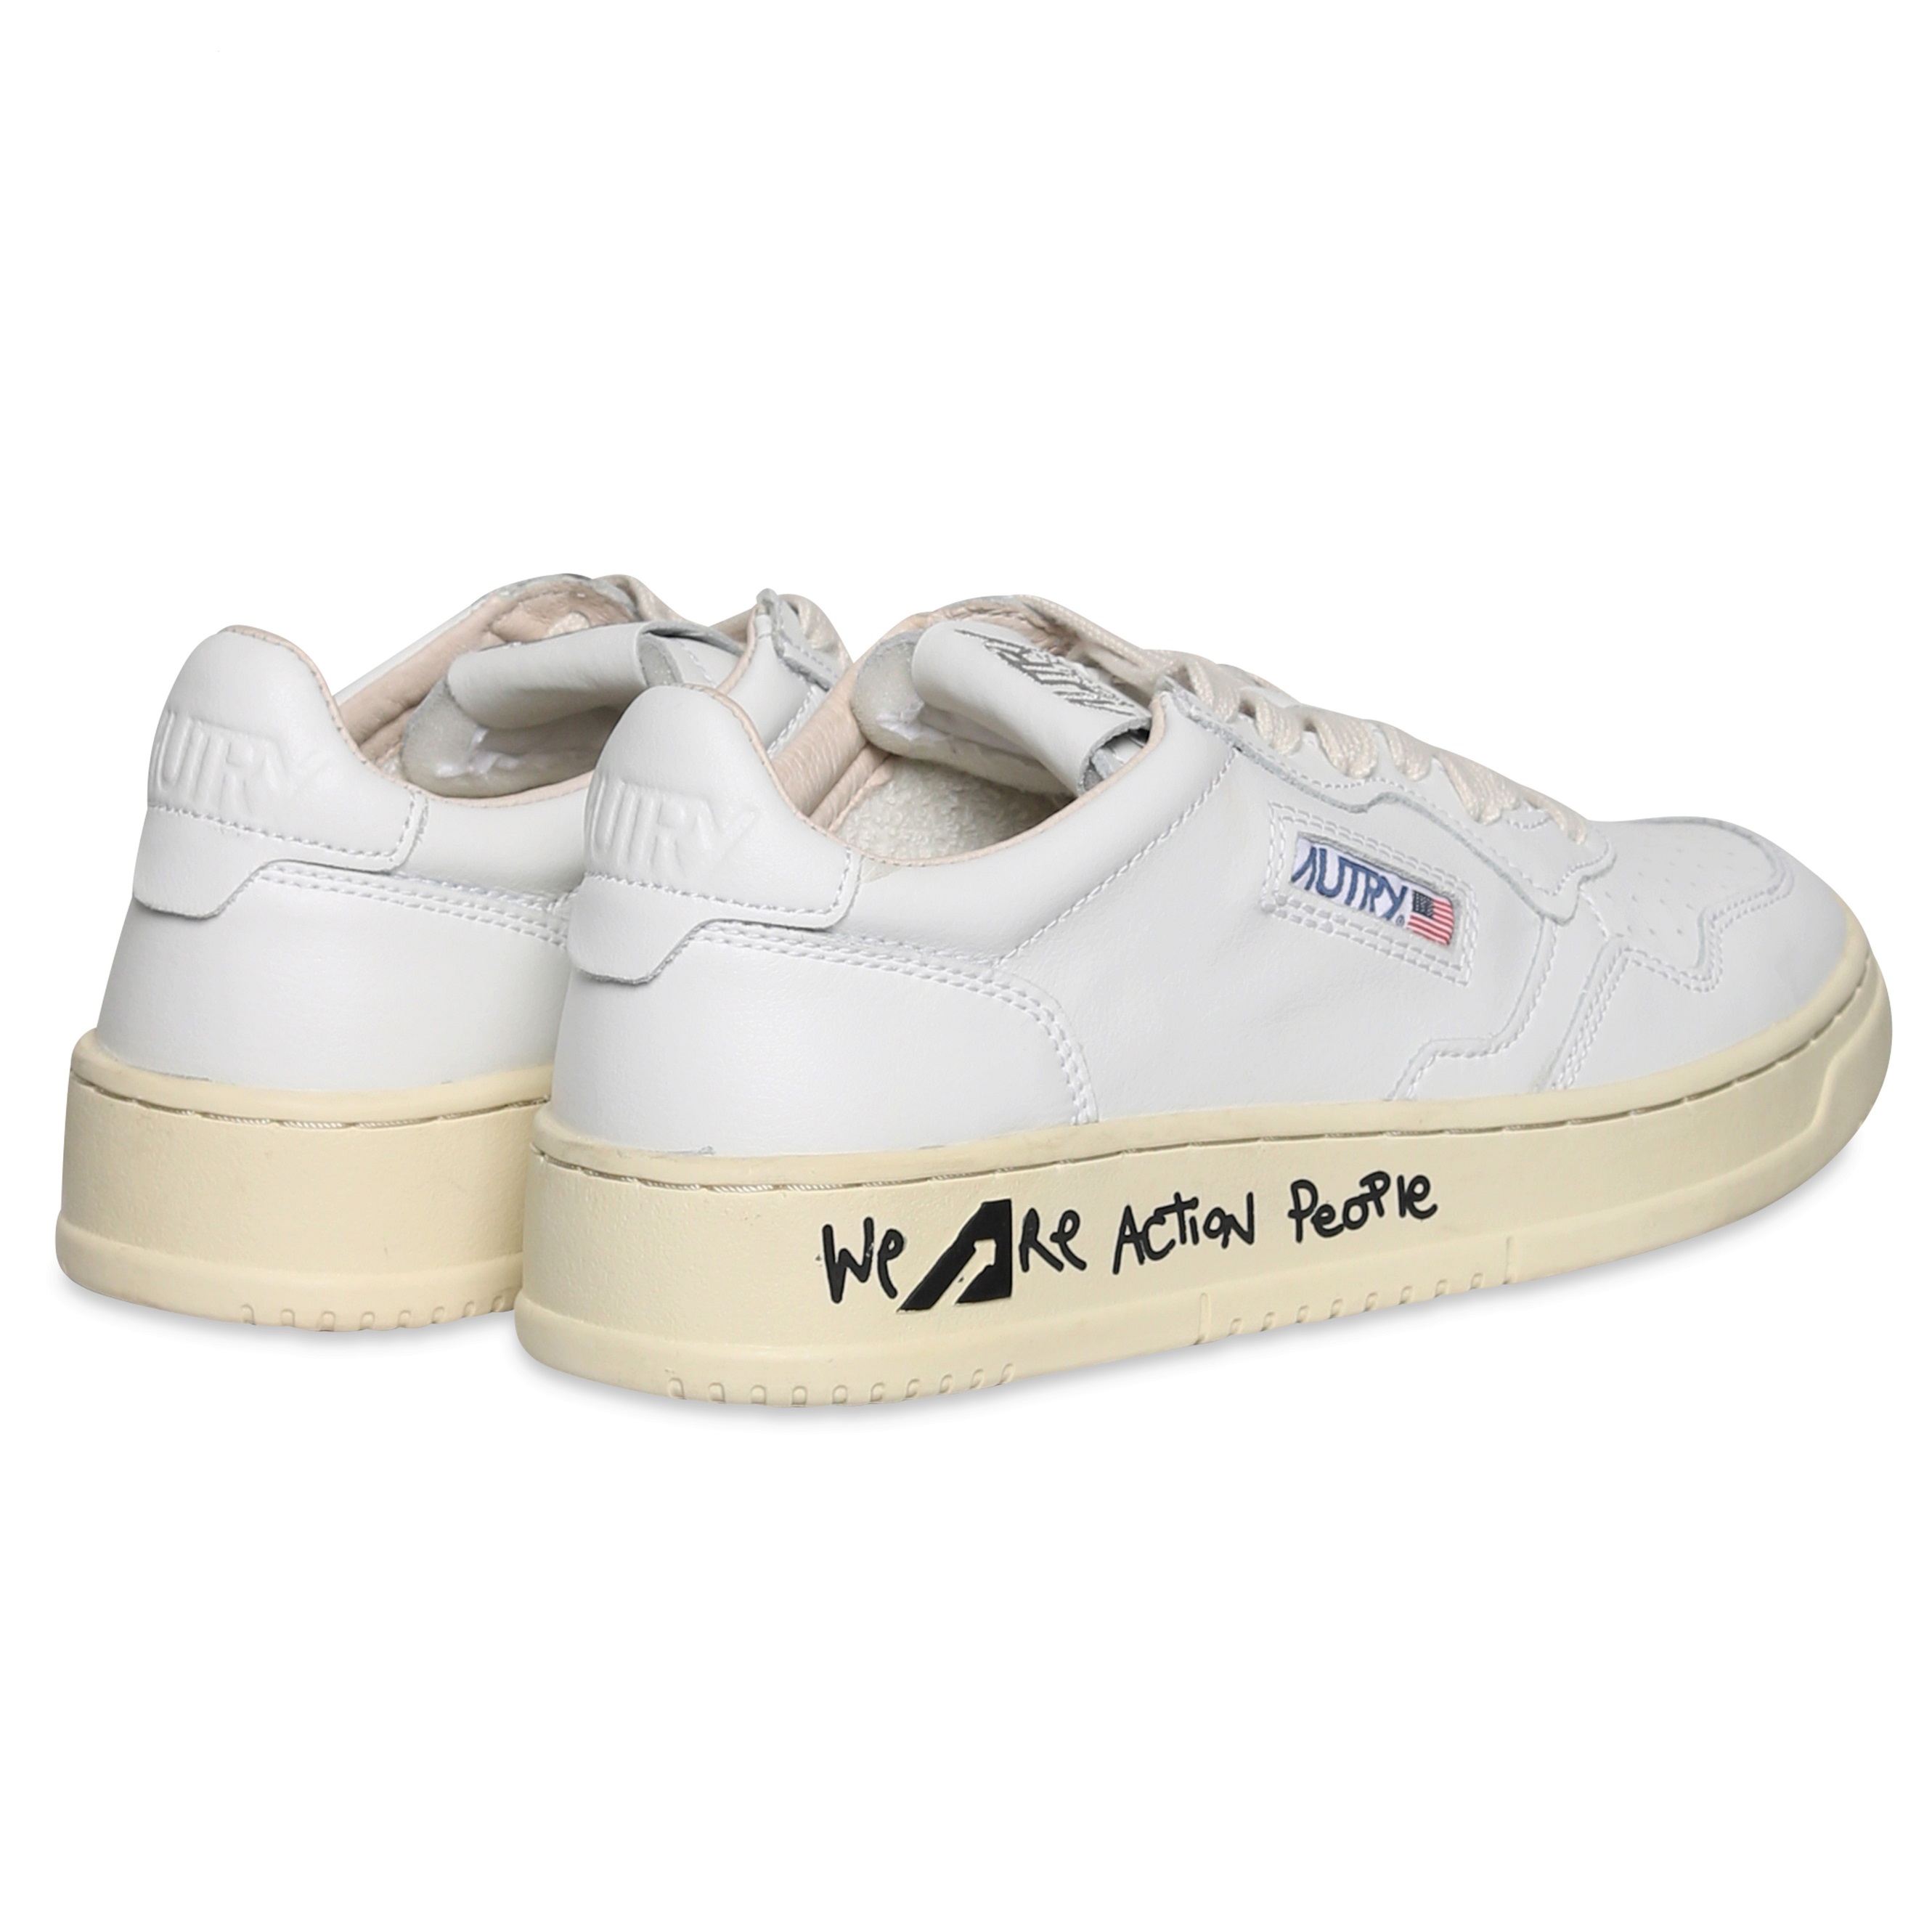 AUTRY ACTION SHOES Low Sneaker White/Draw Action